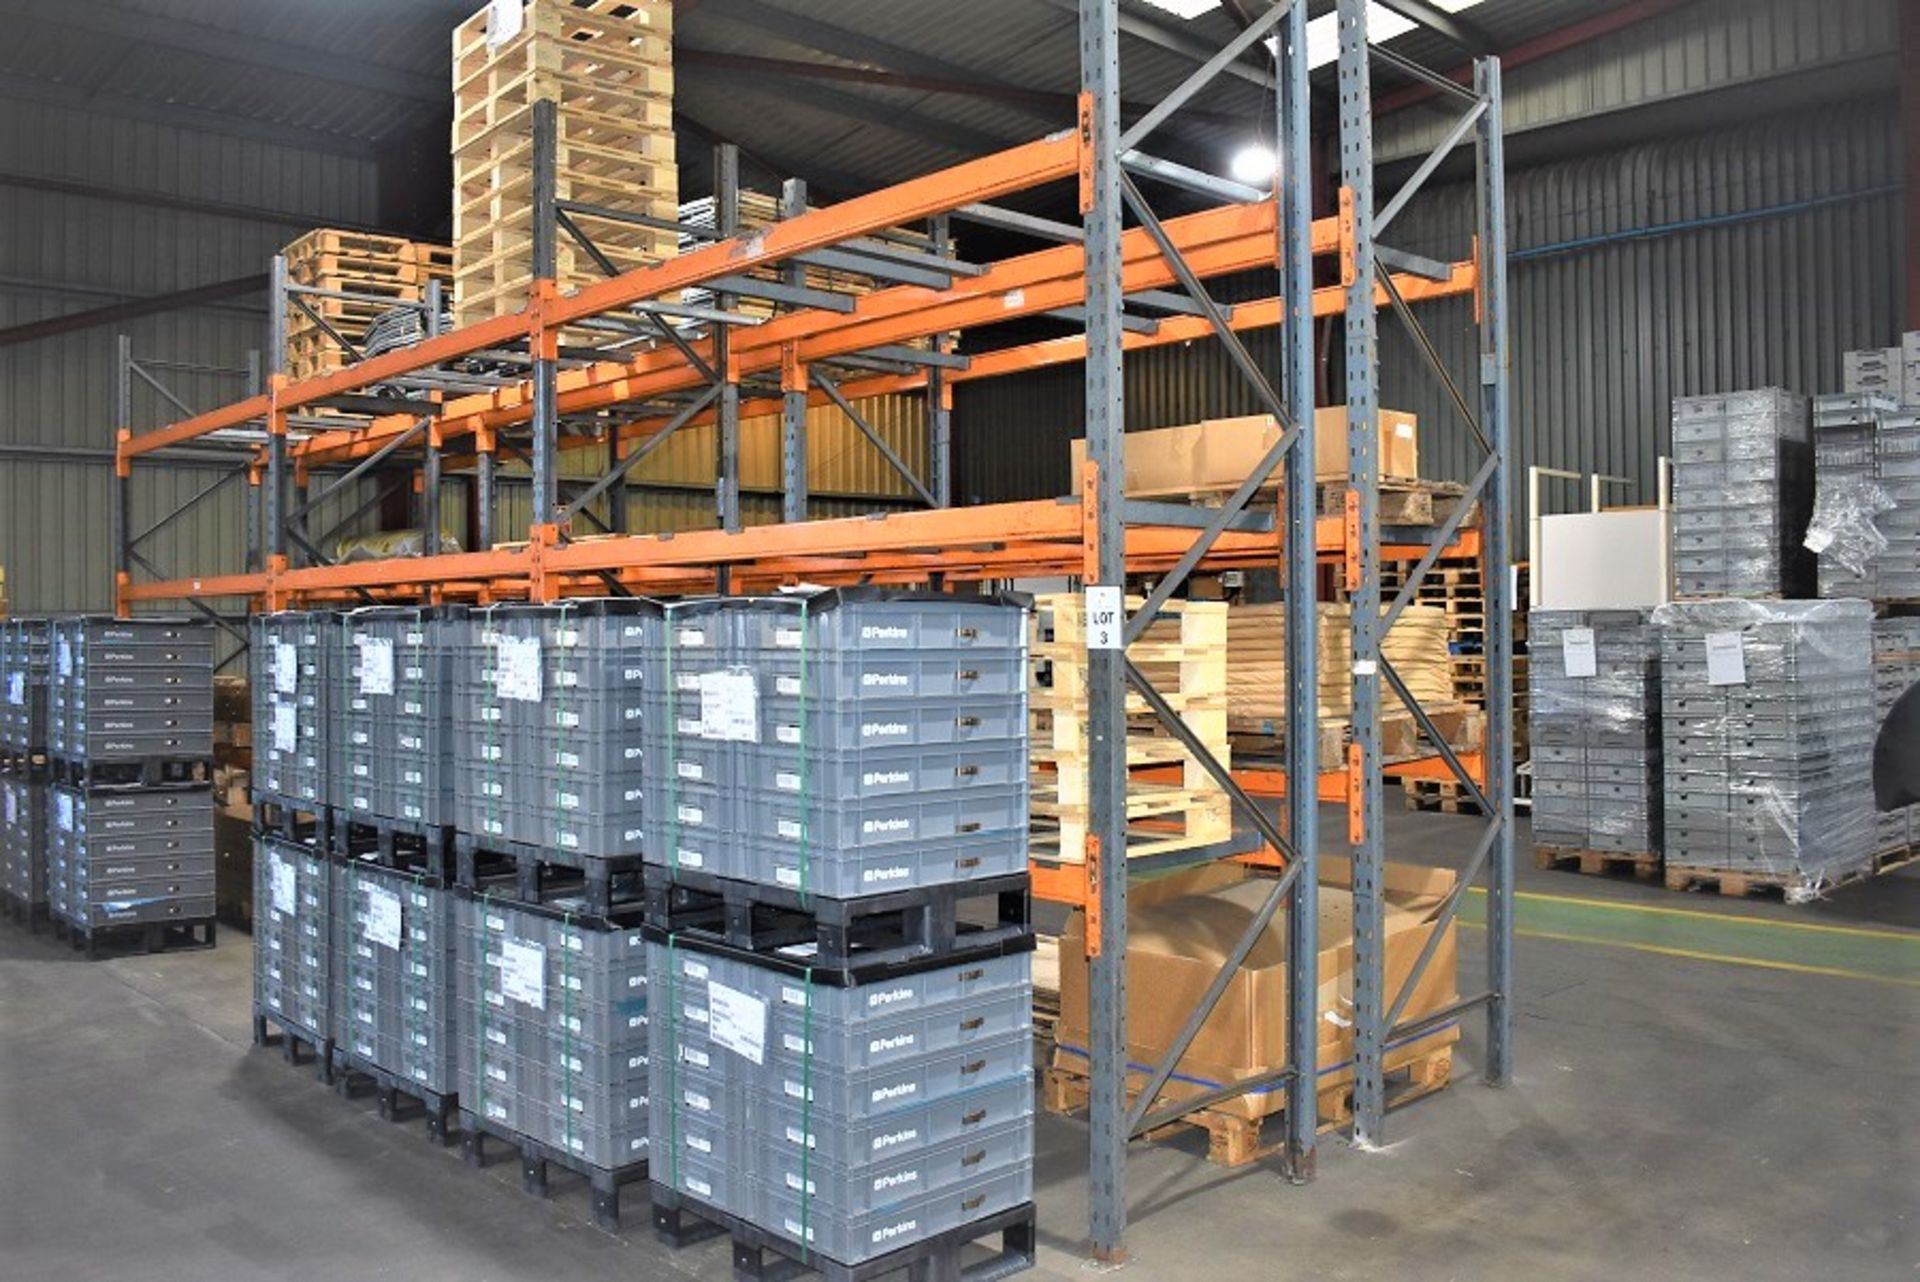 3 X BAYS OF PALLET RACKING 3.5 MTRS 18 BEAMS 4 FRAMES & QTY OF METAL PALLET SUPPORTS